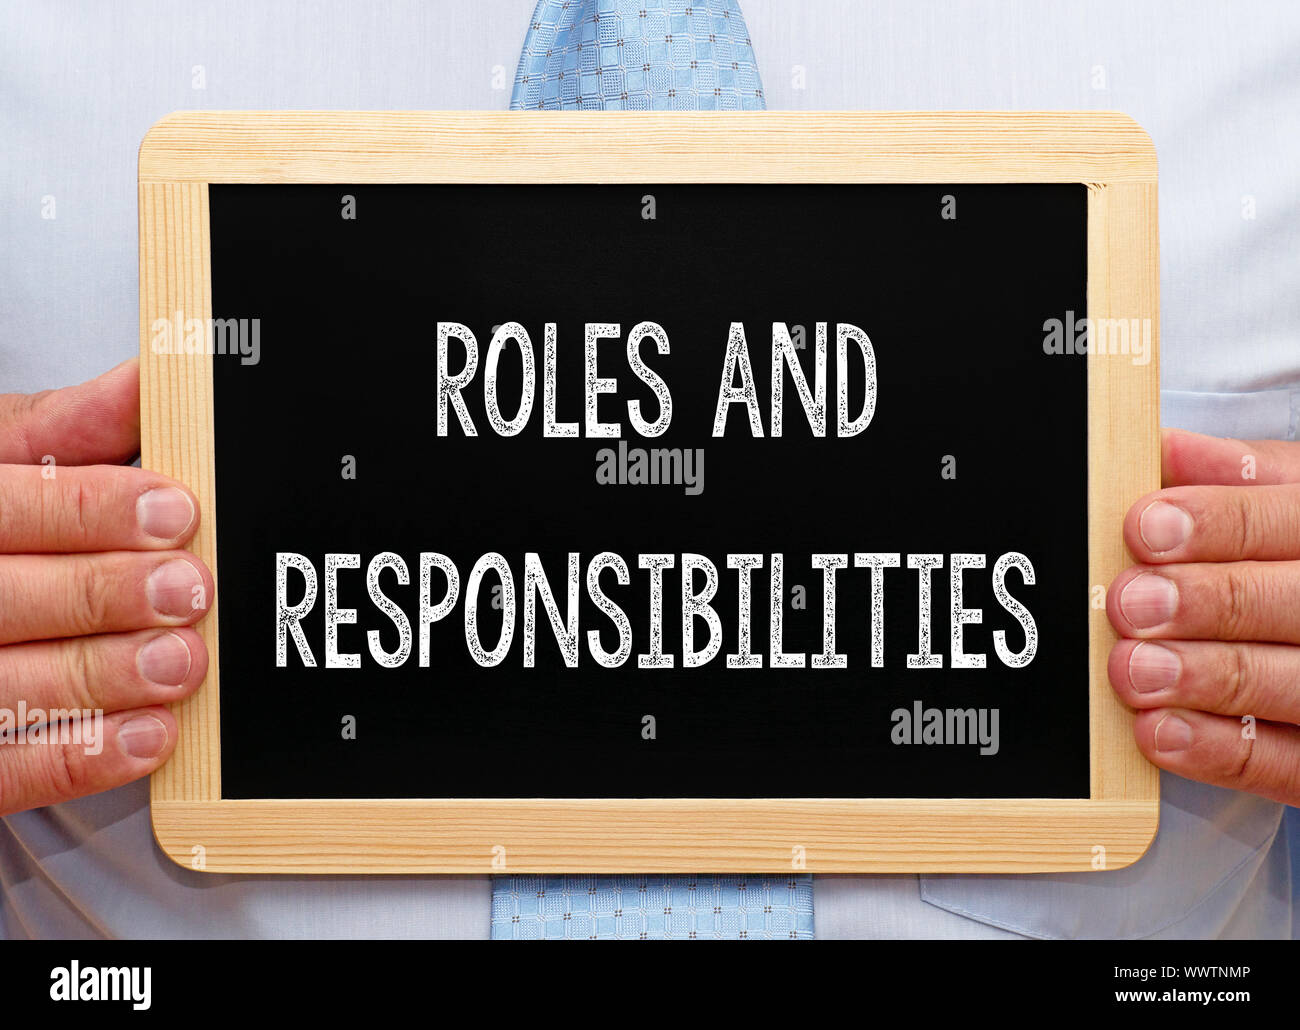 Roles and Responsibilities Stock Photo